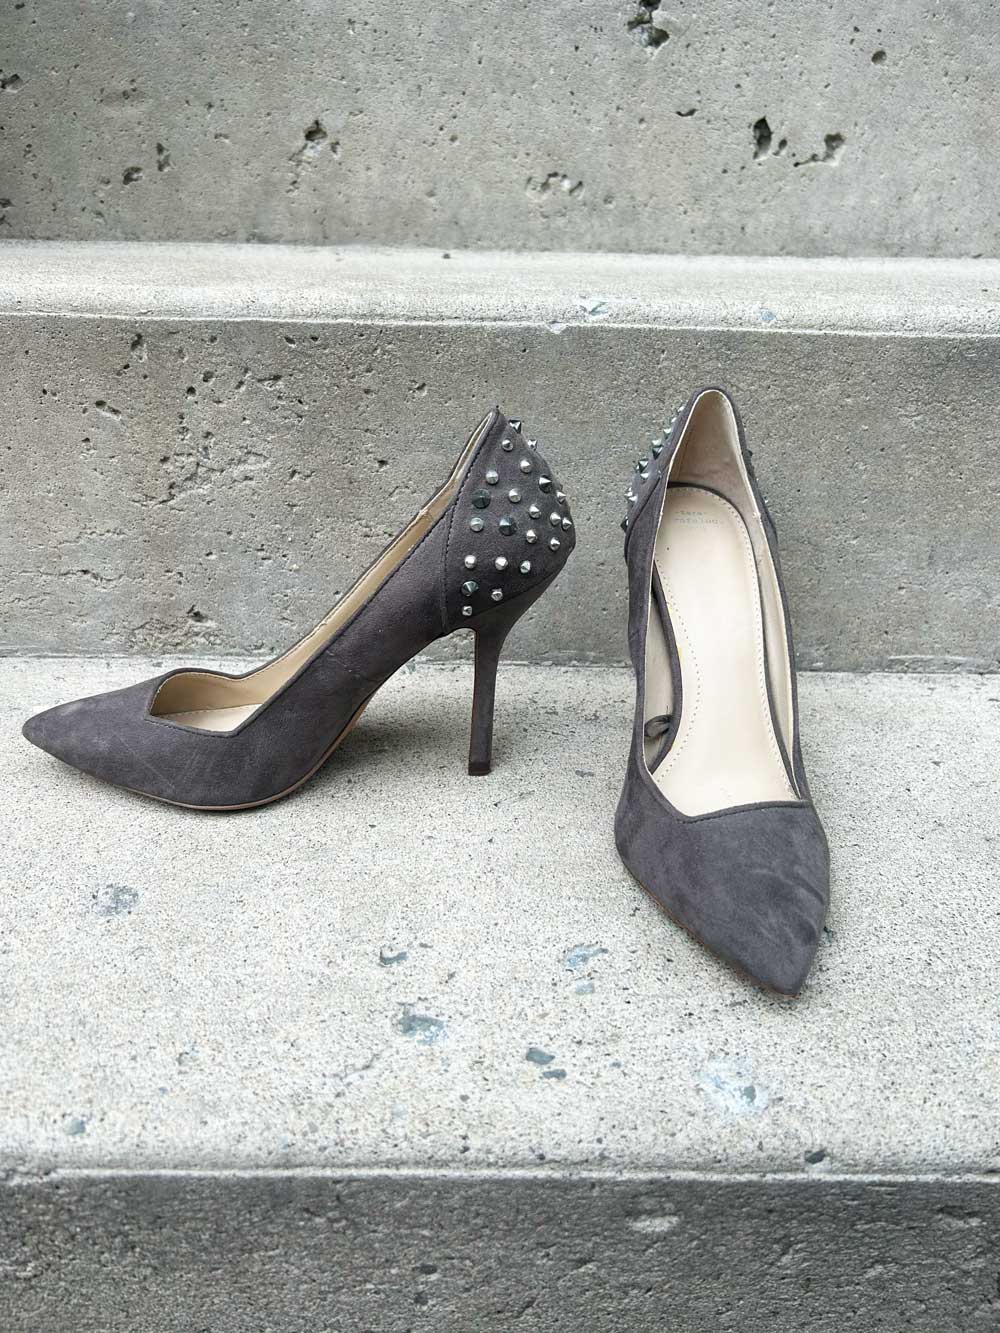 Zara Spike Heels - BY THE PEOPLE SHOP | PAUSE MORE, LIVE MORE